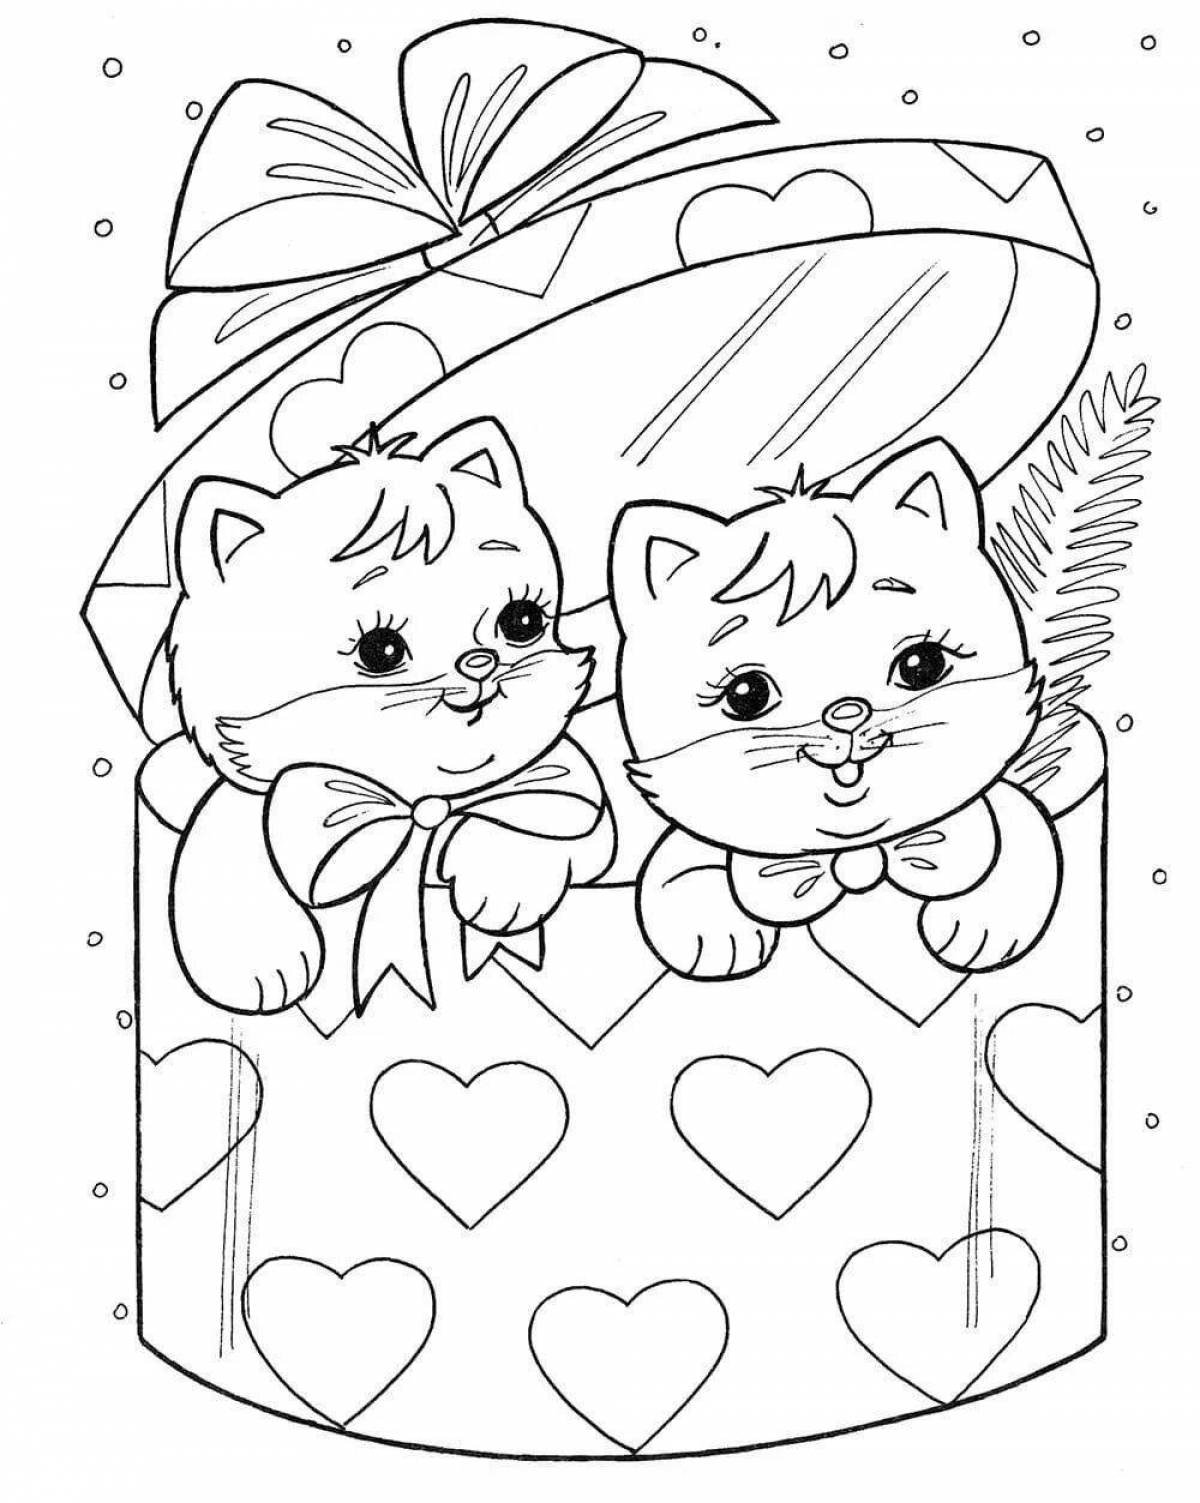 Radiant coloring page 9 years for girls cats